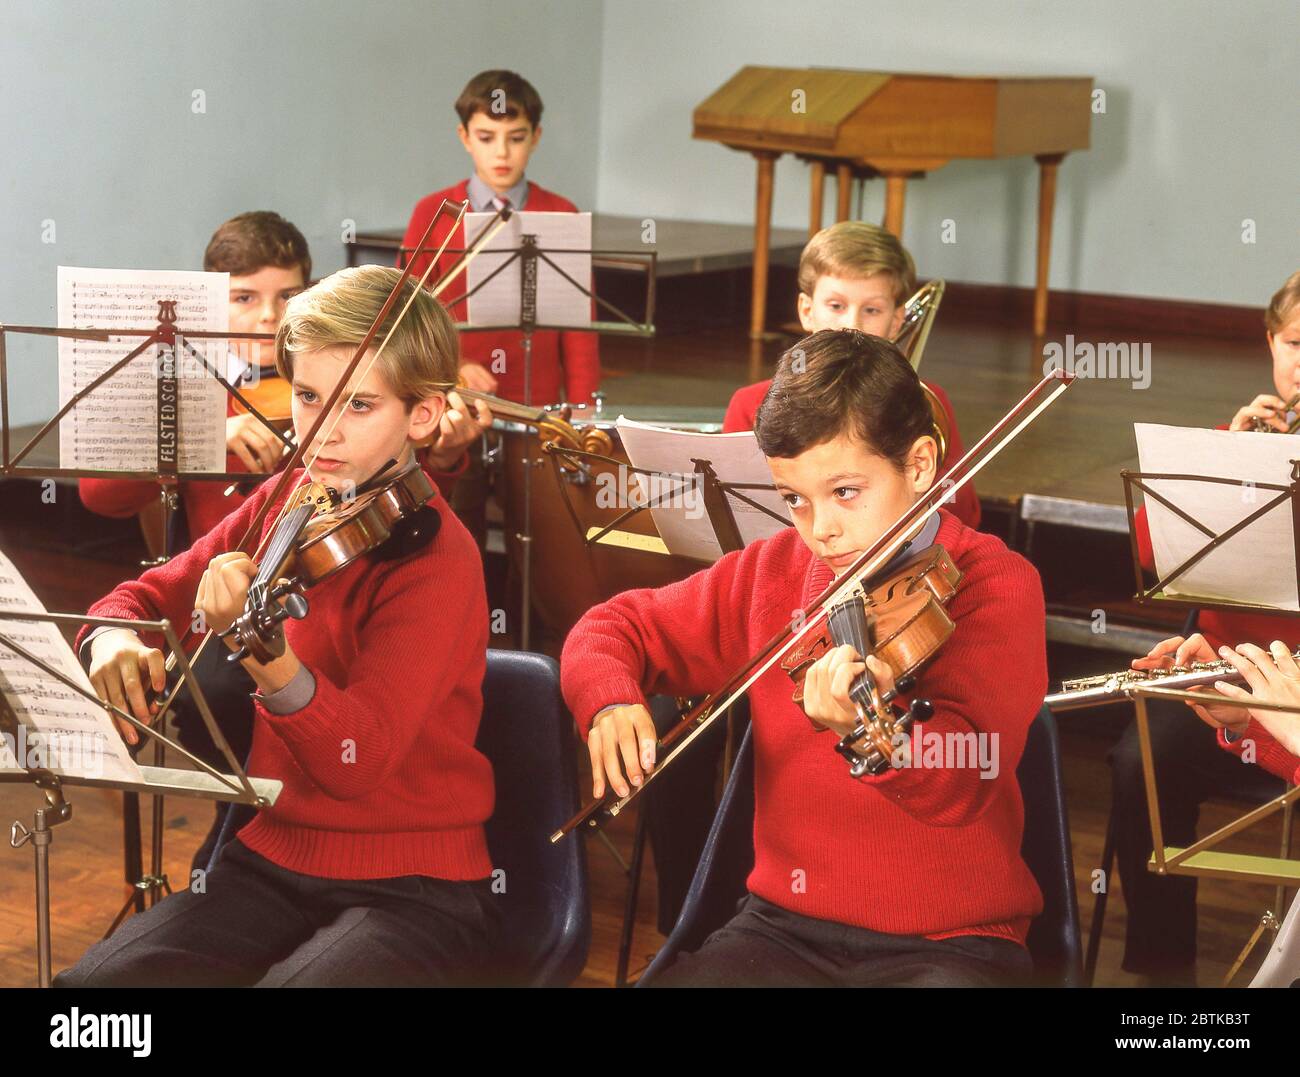 Boys playing violins and flutes in school orchestra, Surrey, England, United Kingdom Stock Photo